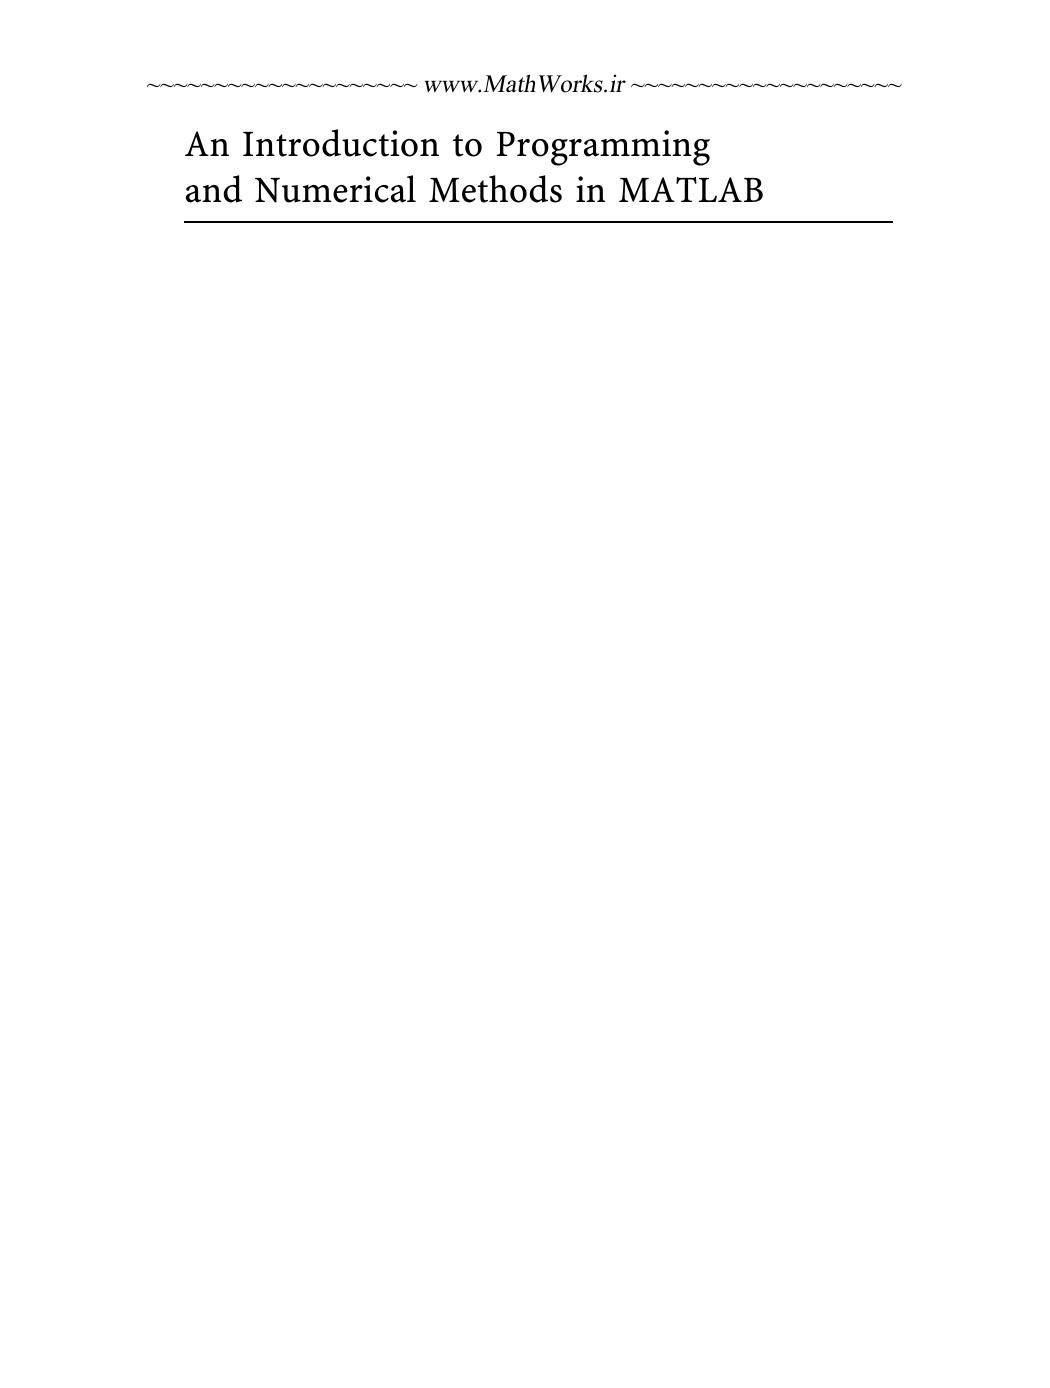 An Introduction to Programming and Numerical Methods in MATLAB_[www.mathworks.ir]